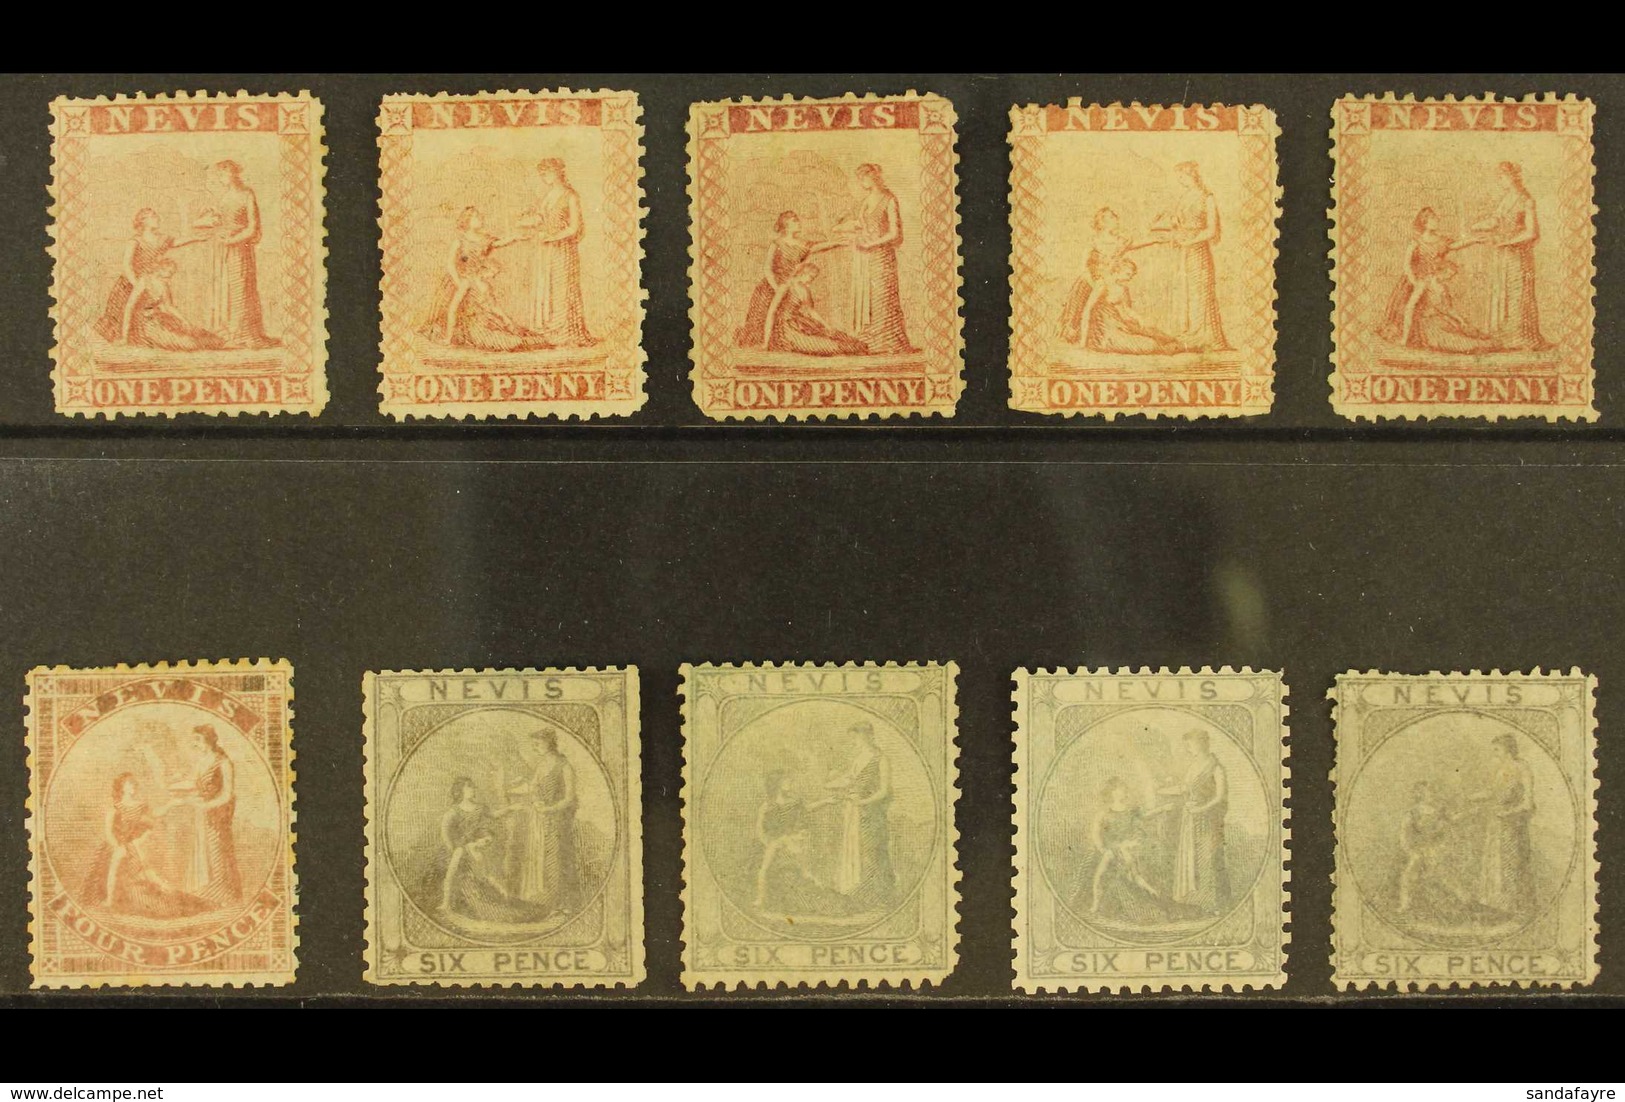 1862 Recess Printed 1d (5), 4d And 6d (4), SG 1/3,  Mint Or Unused, Some With Faults But Excellent For Plating. (10 Stam - St.Christopher-Nevis-Anguilla (...-1980)